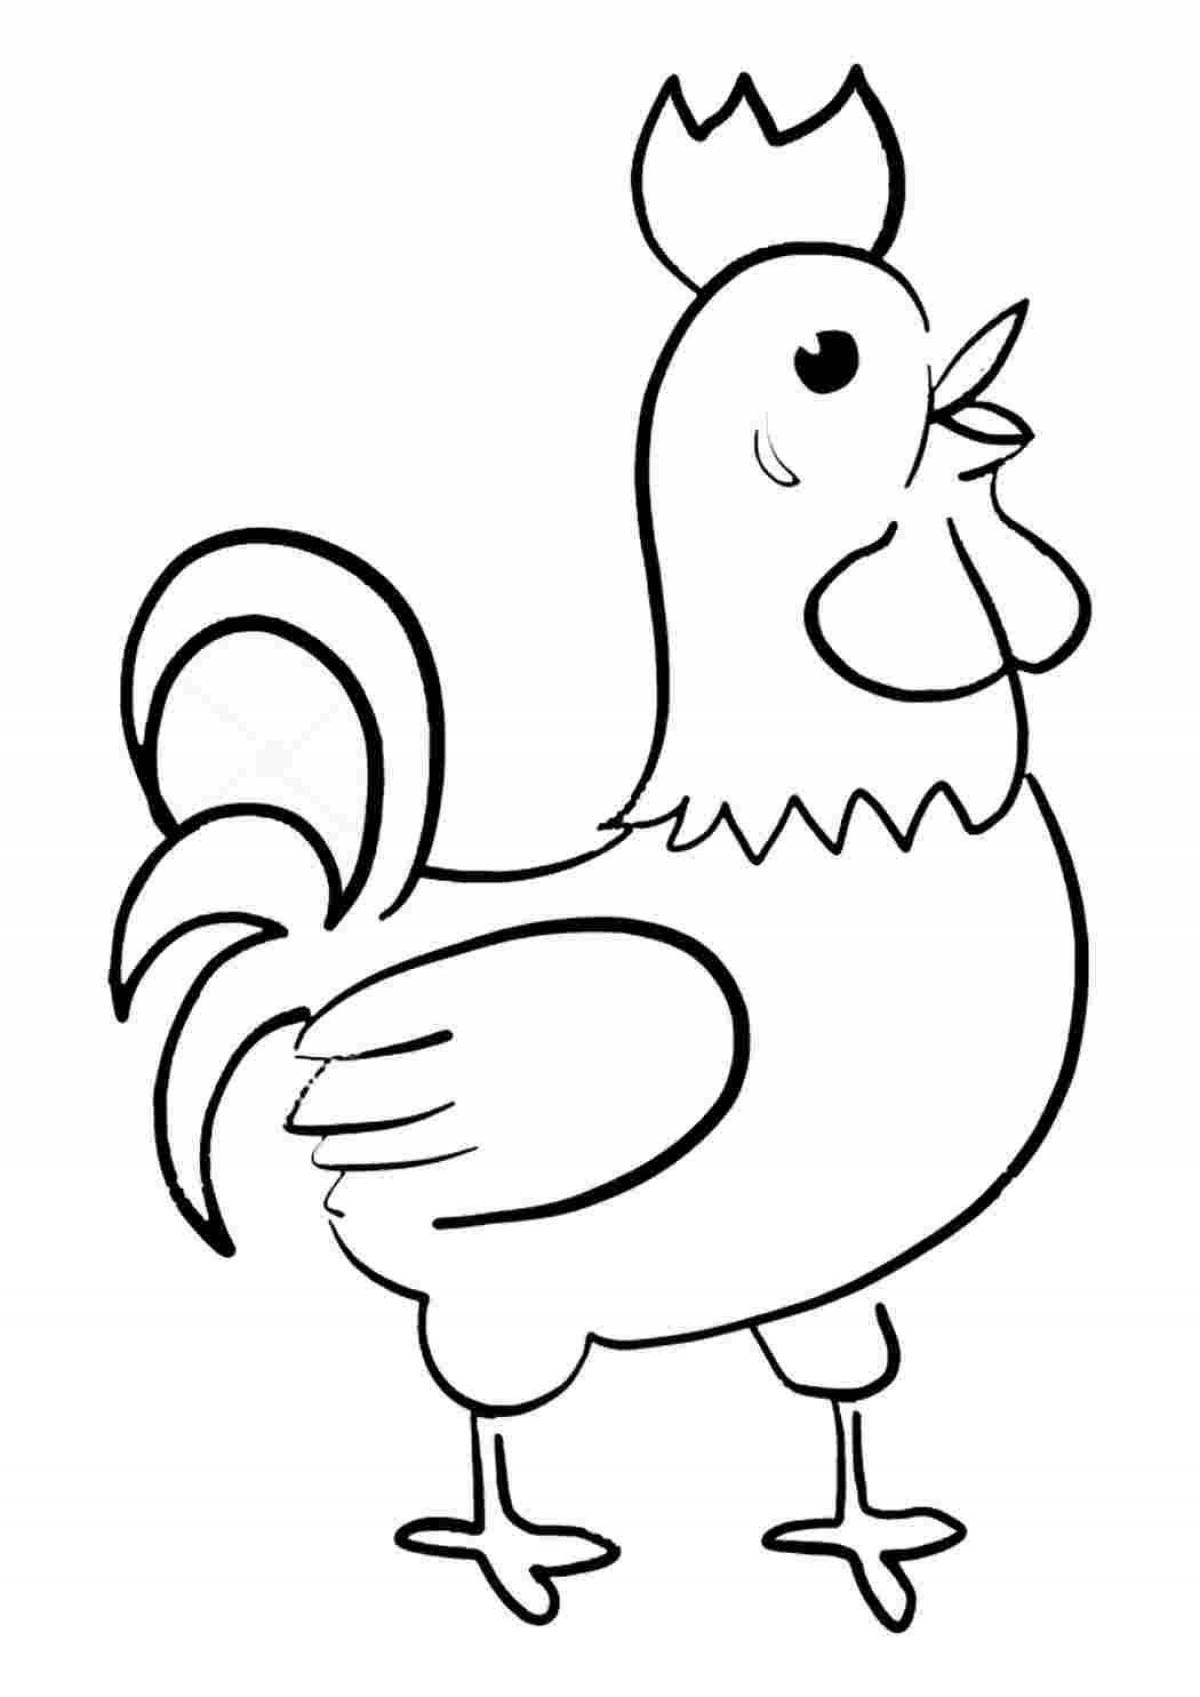 Adorable rooster coloring book for 4-5 year olds